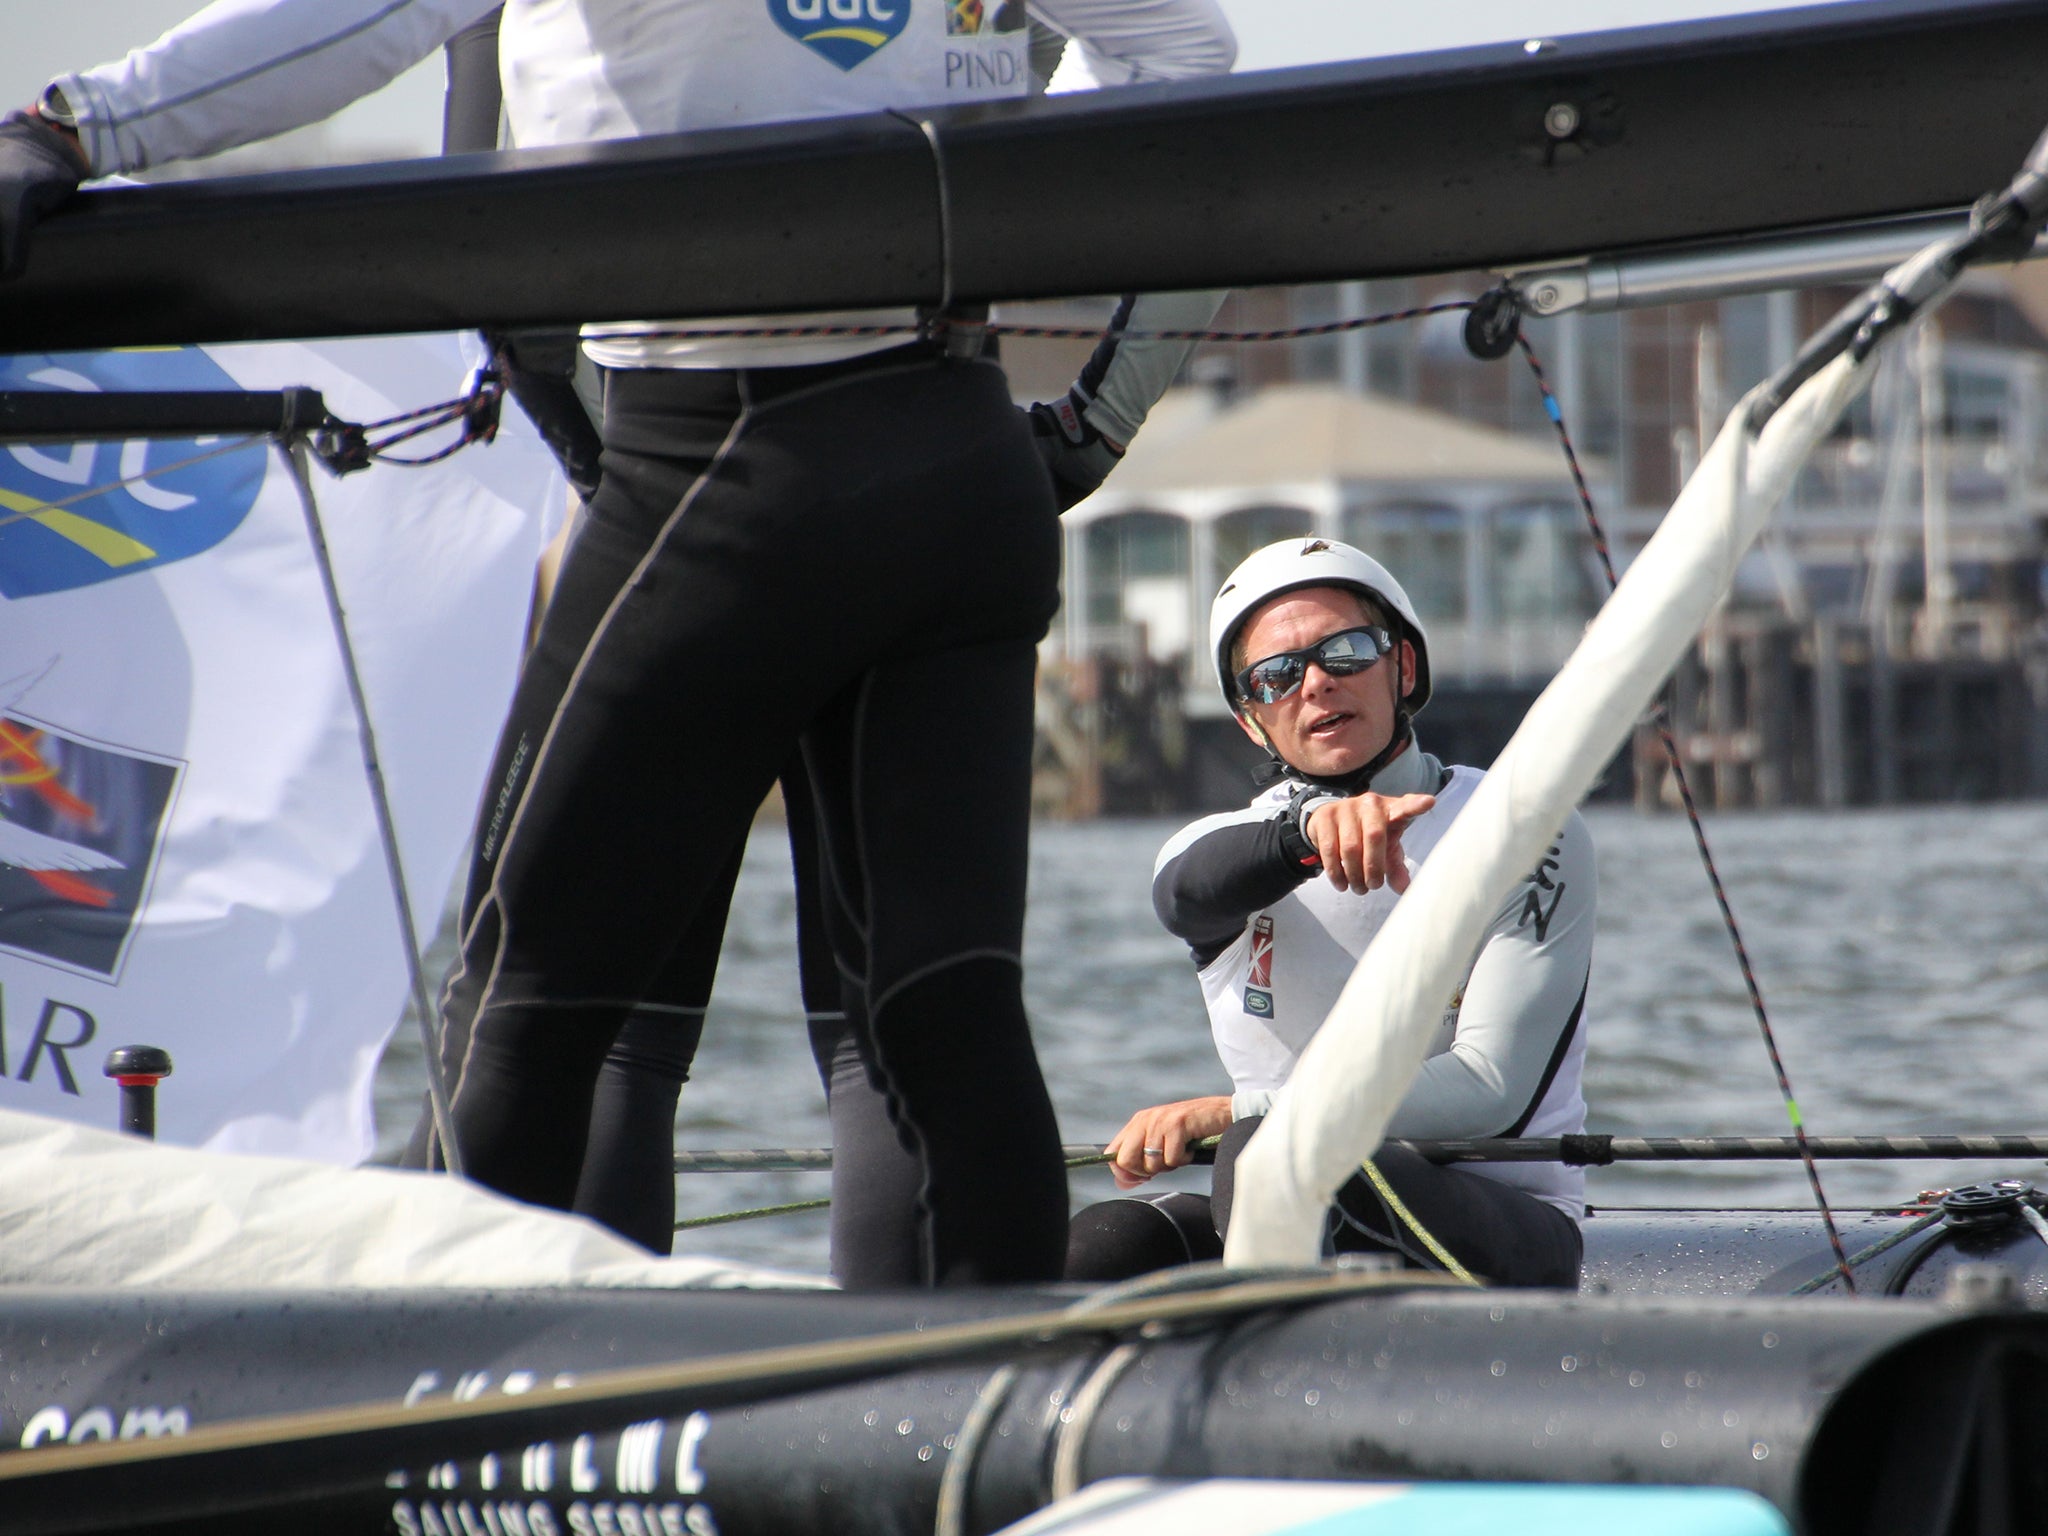 America’s Cup helmsman and Olympic medallist Chris Draper boosted the fortunes of GAC Pindar at the Cardiff regatta in the Extreme Sailing Series